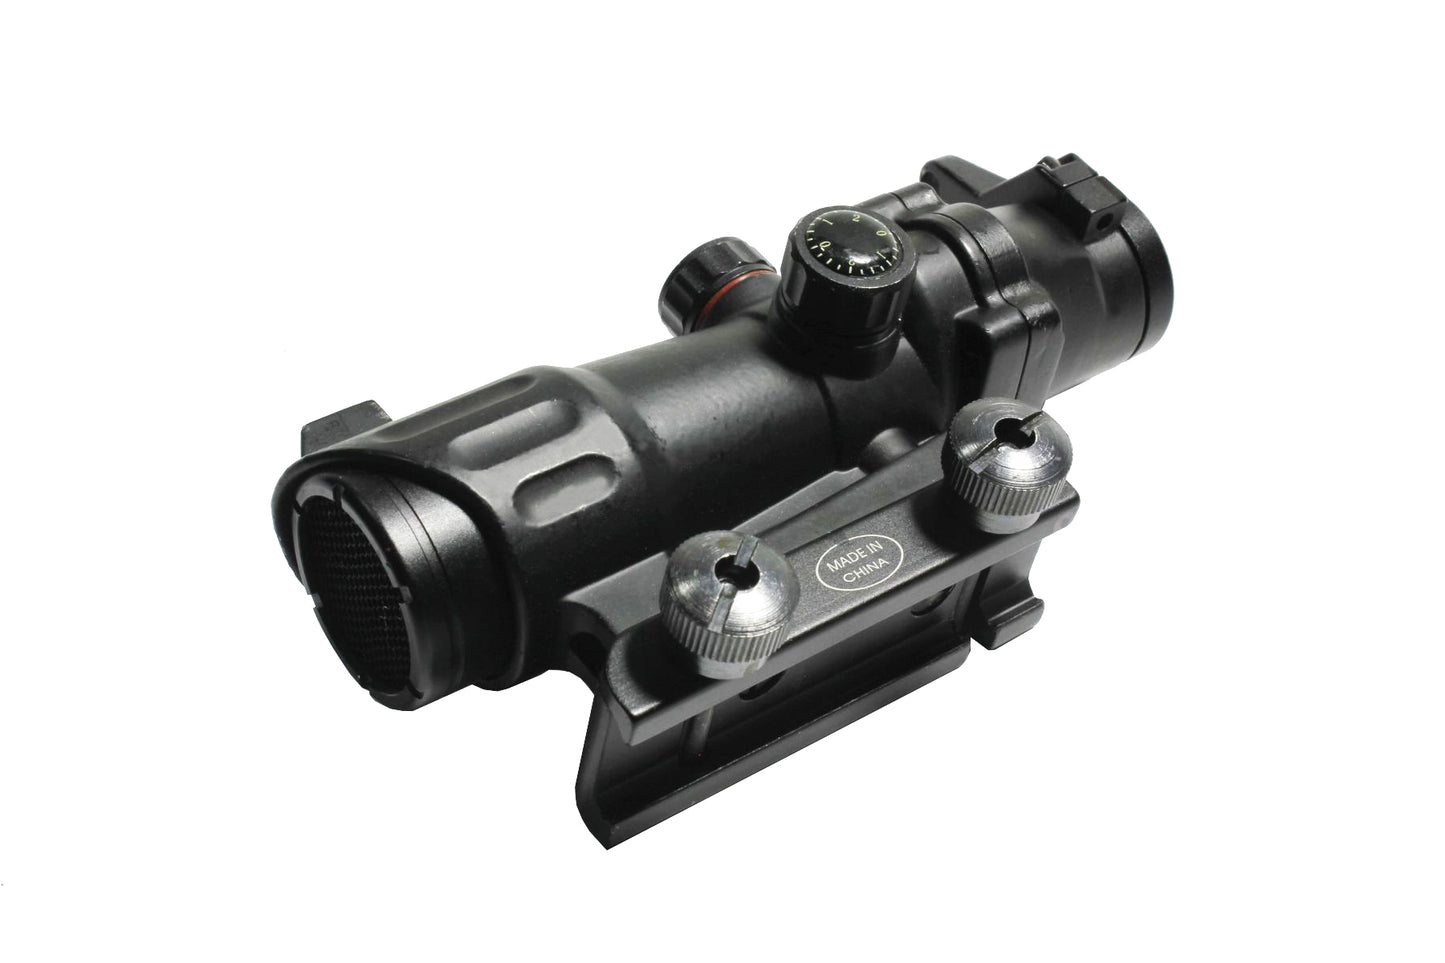 Premium ACOG Styled Red Dot Optic w/ Integrated Mounting & Kill Flash